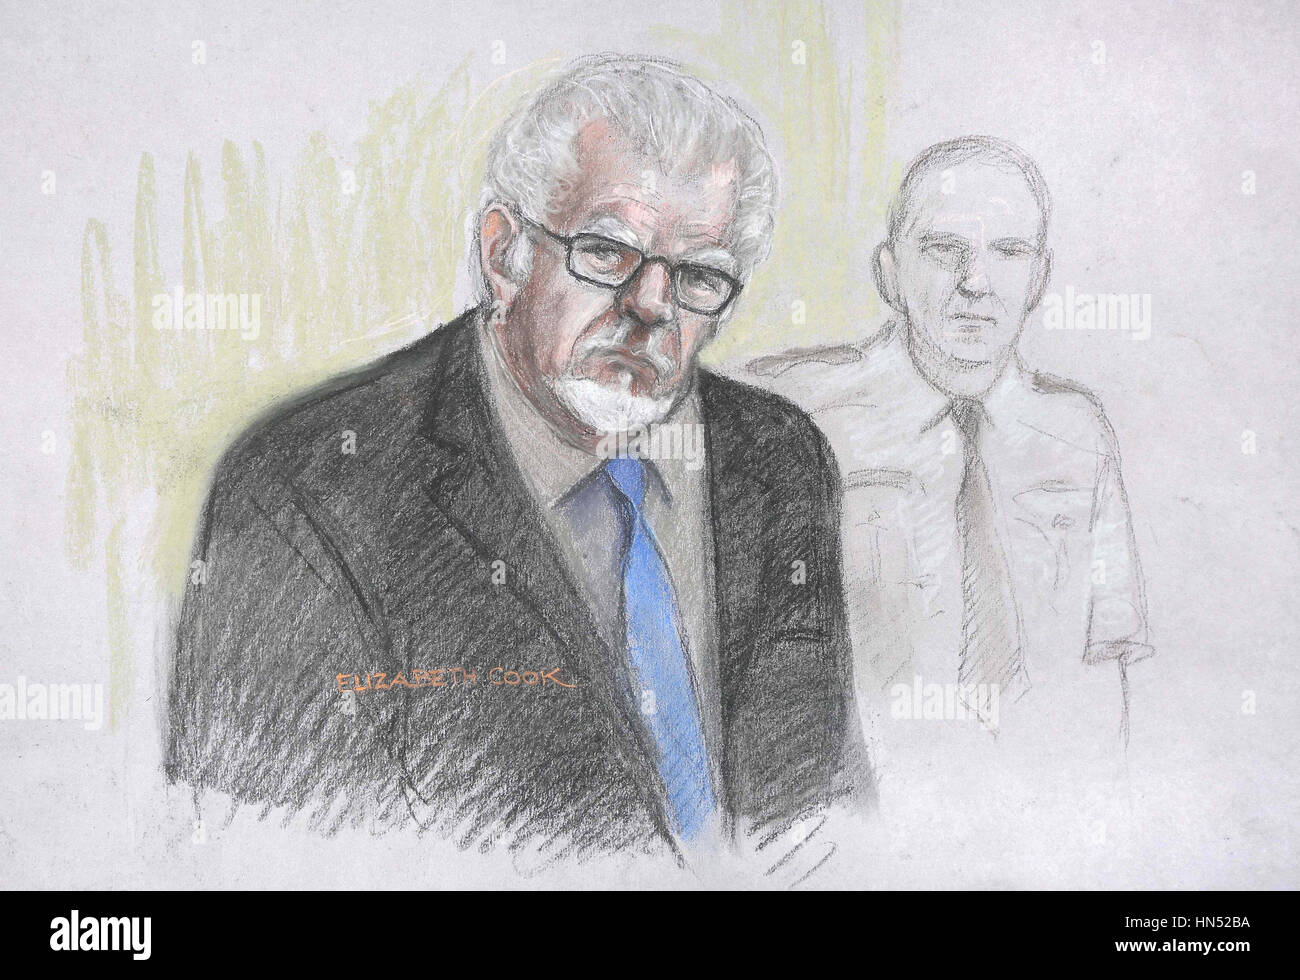 A court artist sketch by Elizabeth Cook of Rolf Harris at Southwark Crown Court in London as the disgraced entertainer has been found not guilty of three of the seven alleged assaults said to have taken place over four decades, following a second trial at London's Southwark Crown Court. Stock Photo